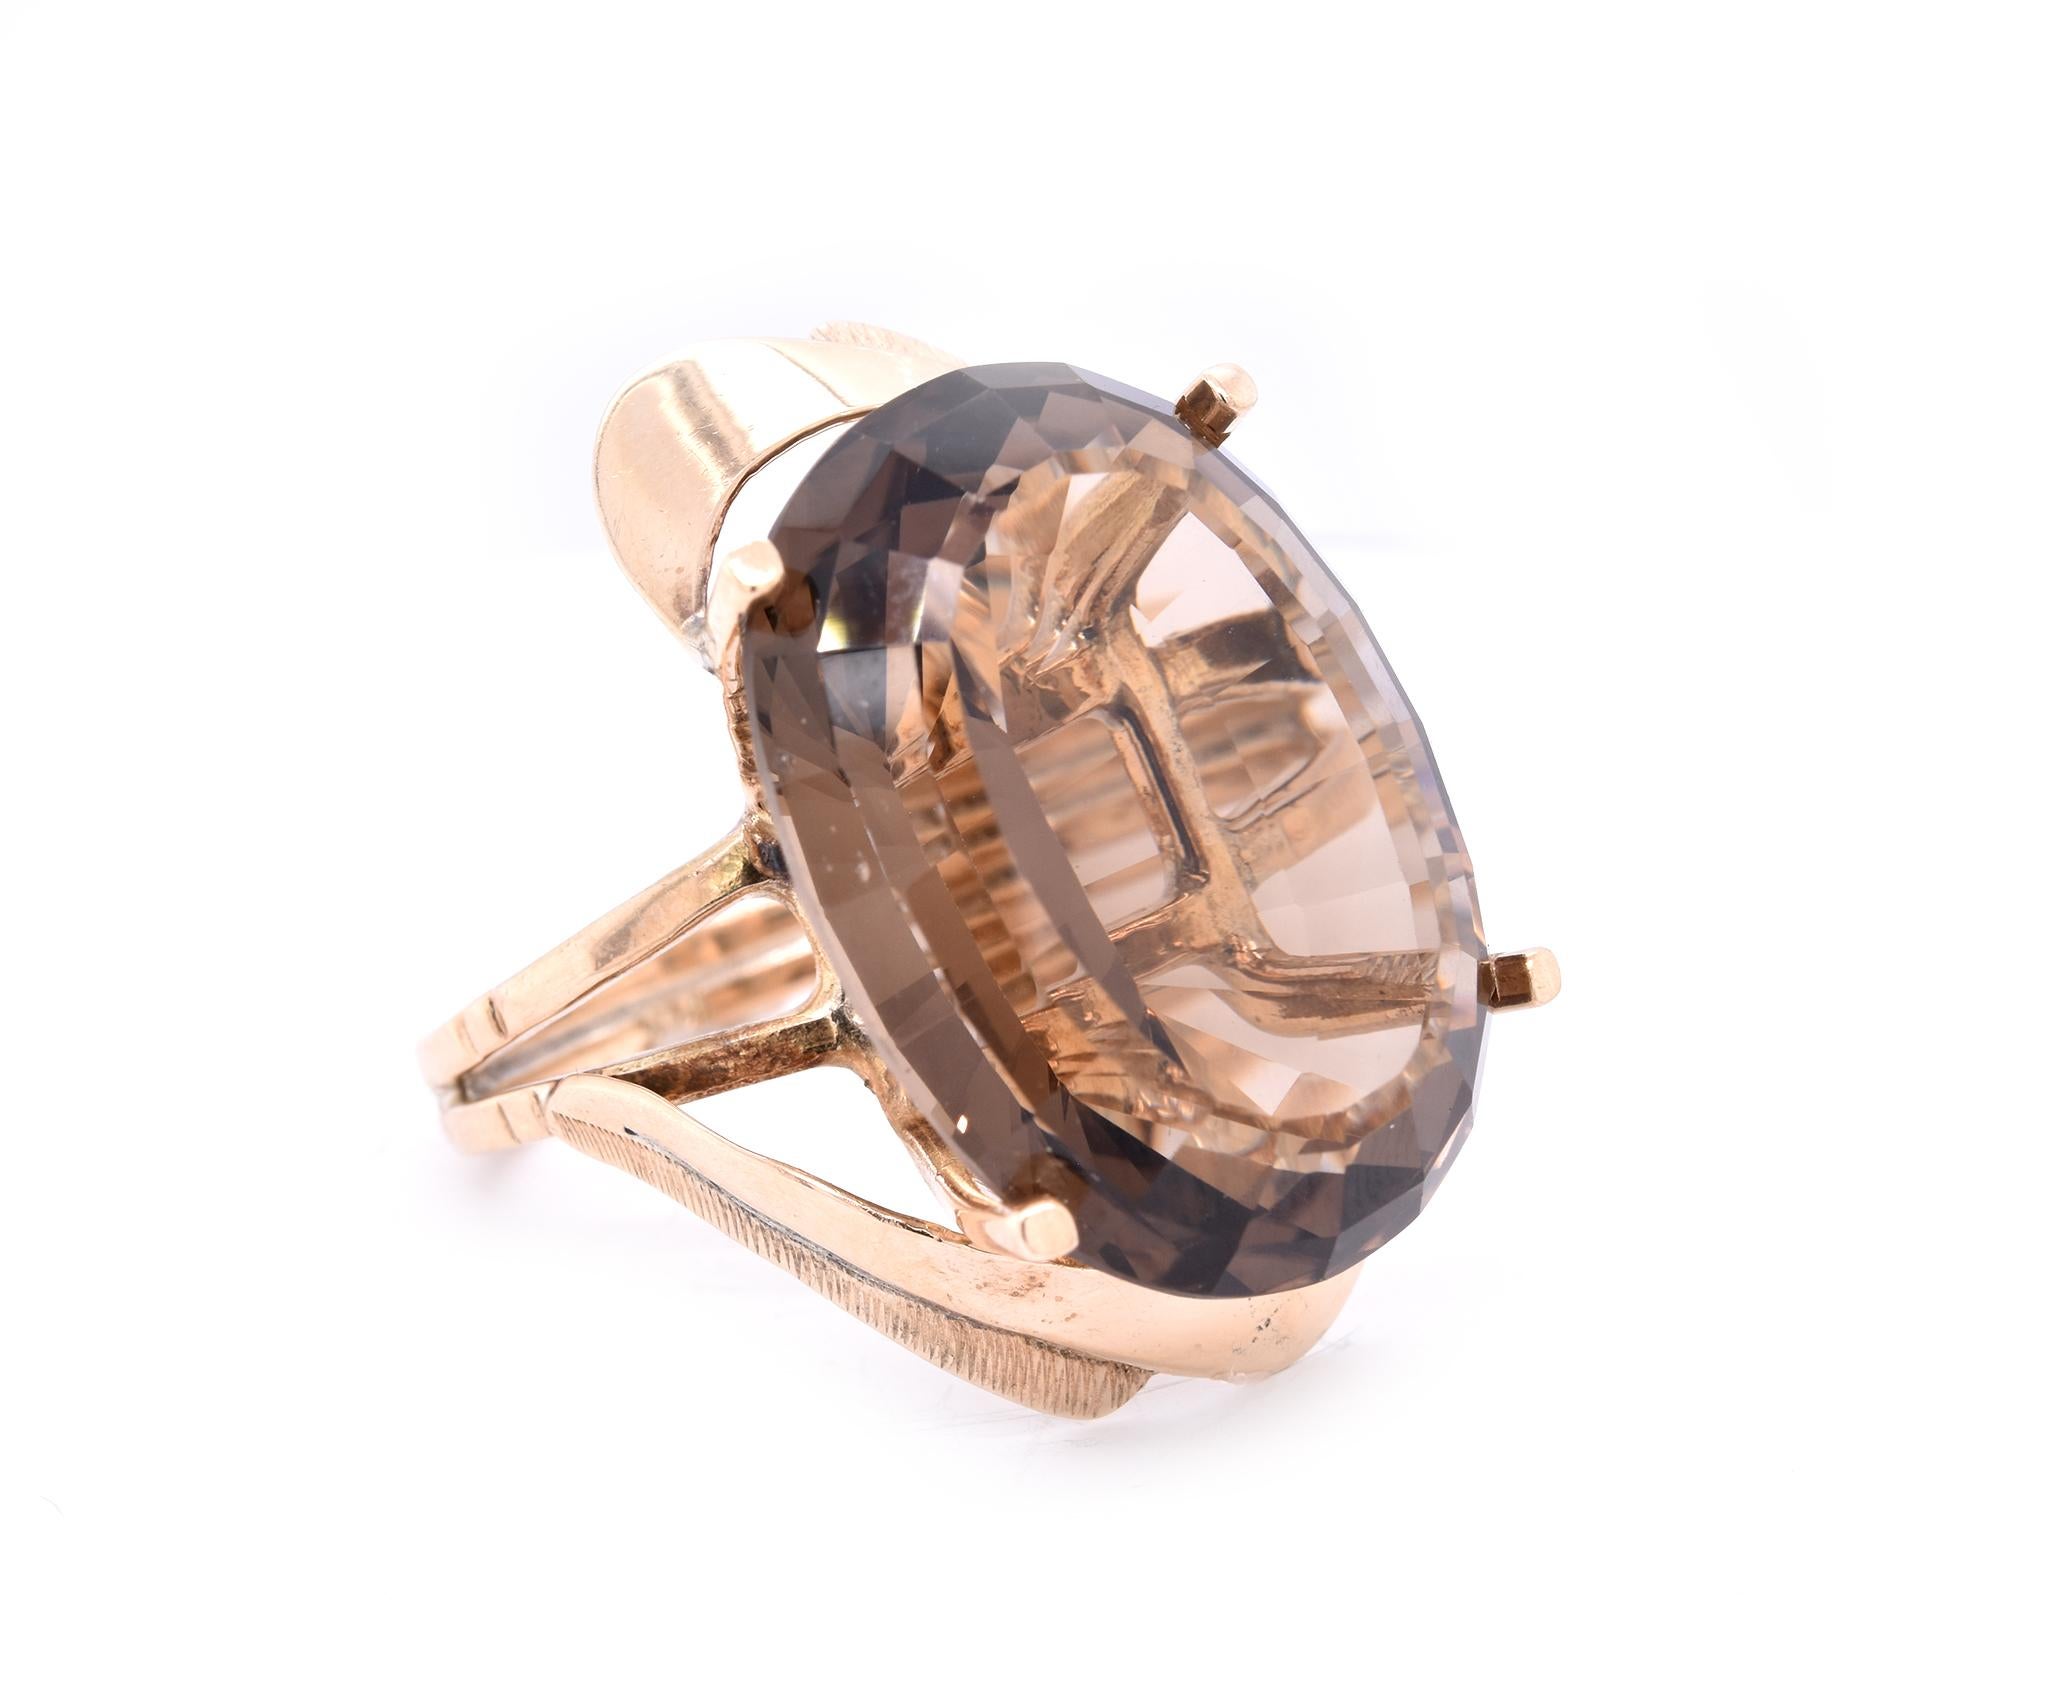 Designer: custom
Material: 14K yellow gold
Smoky Topaz: 1 oval cut = 38.09ct
Ring Size: 8 (please allow up to 2 additional business days for sizing requests)
Dimensions: ring top measures 30.94mm X 20.66mm
Weight:  12.13 grams
